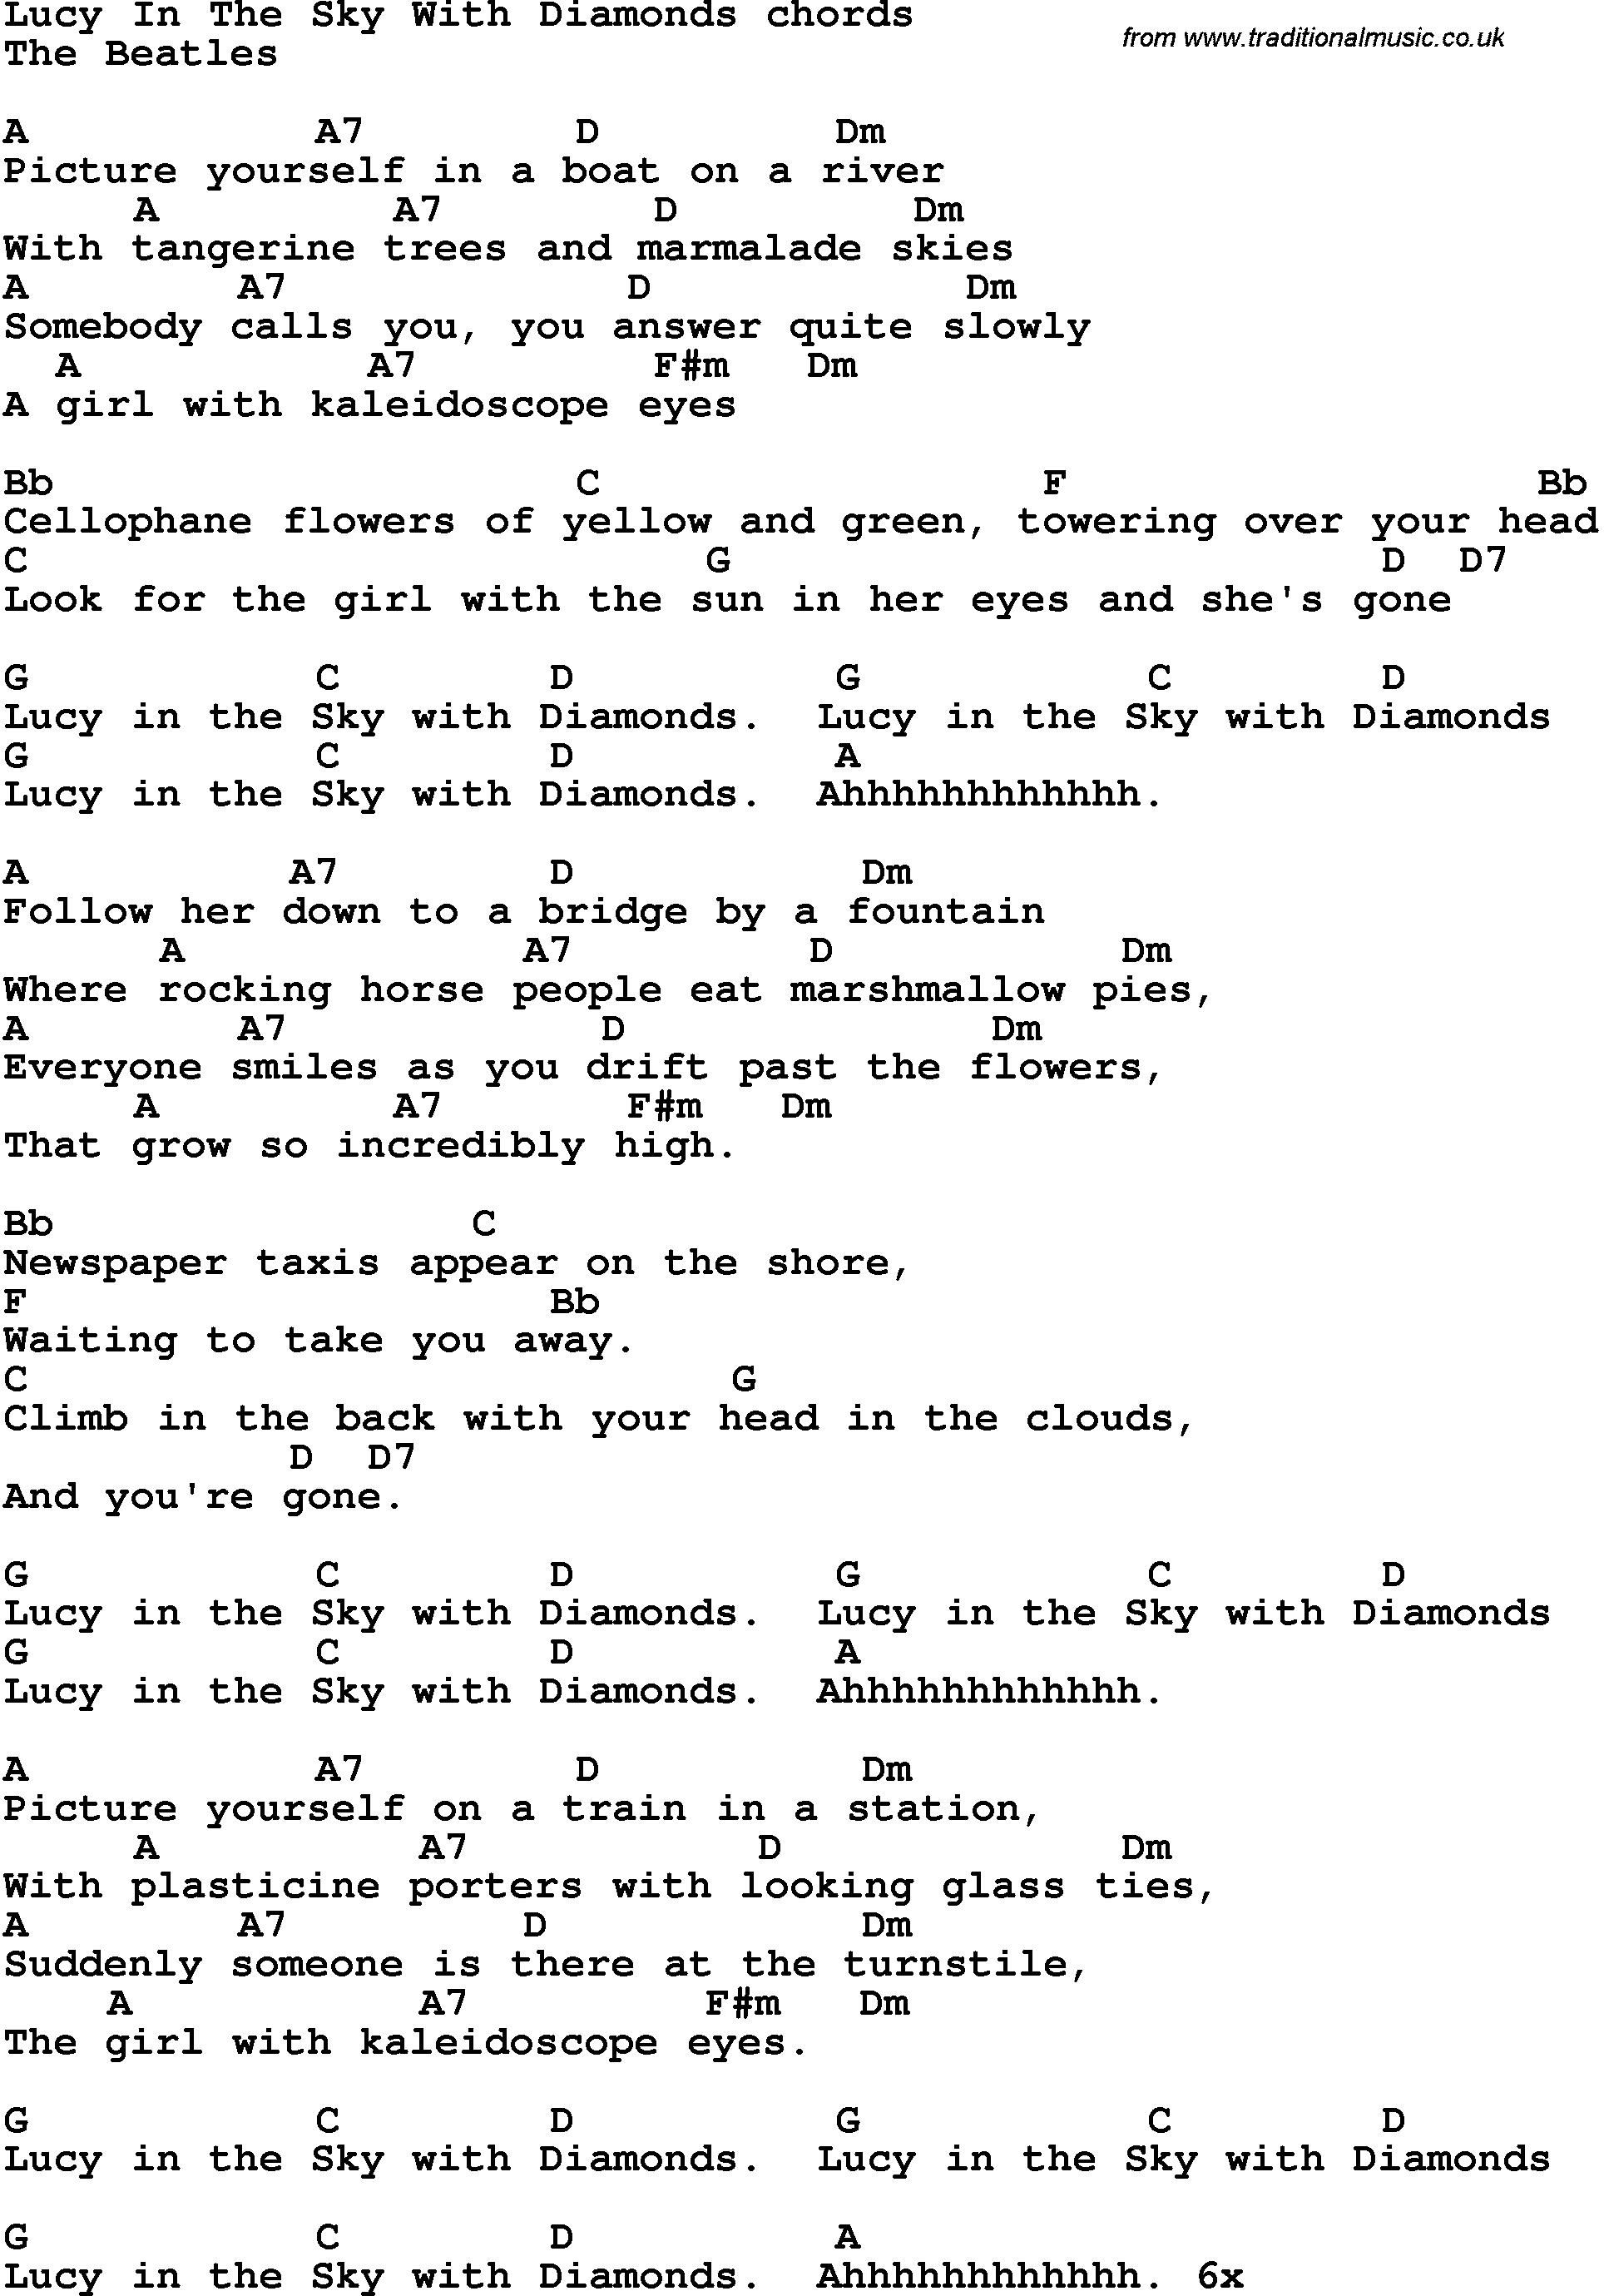 Song Lyrics with guitar chords for Lucy In The Sky With Diamonds